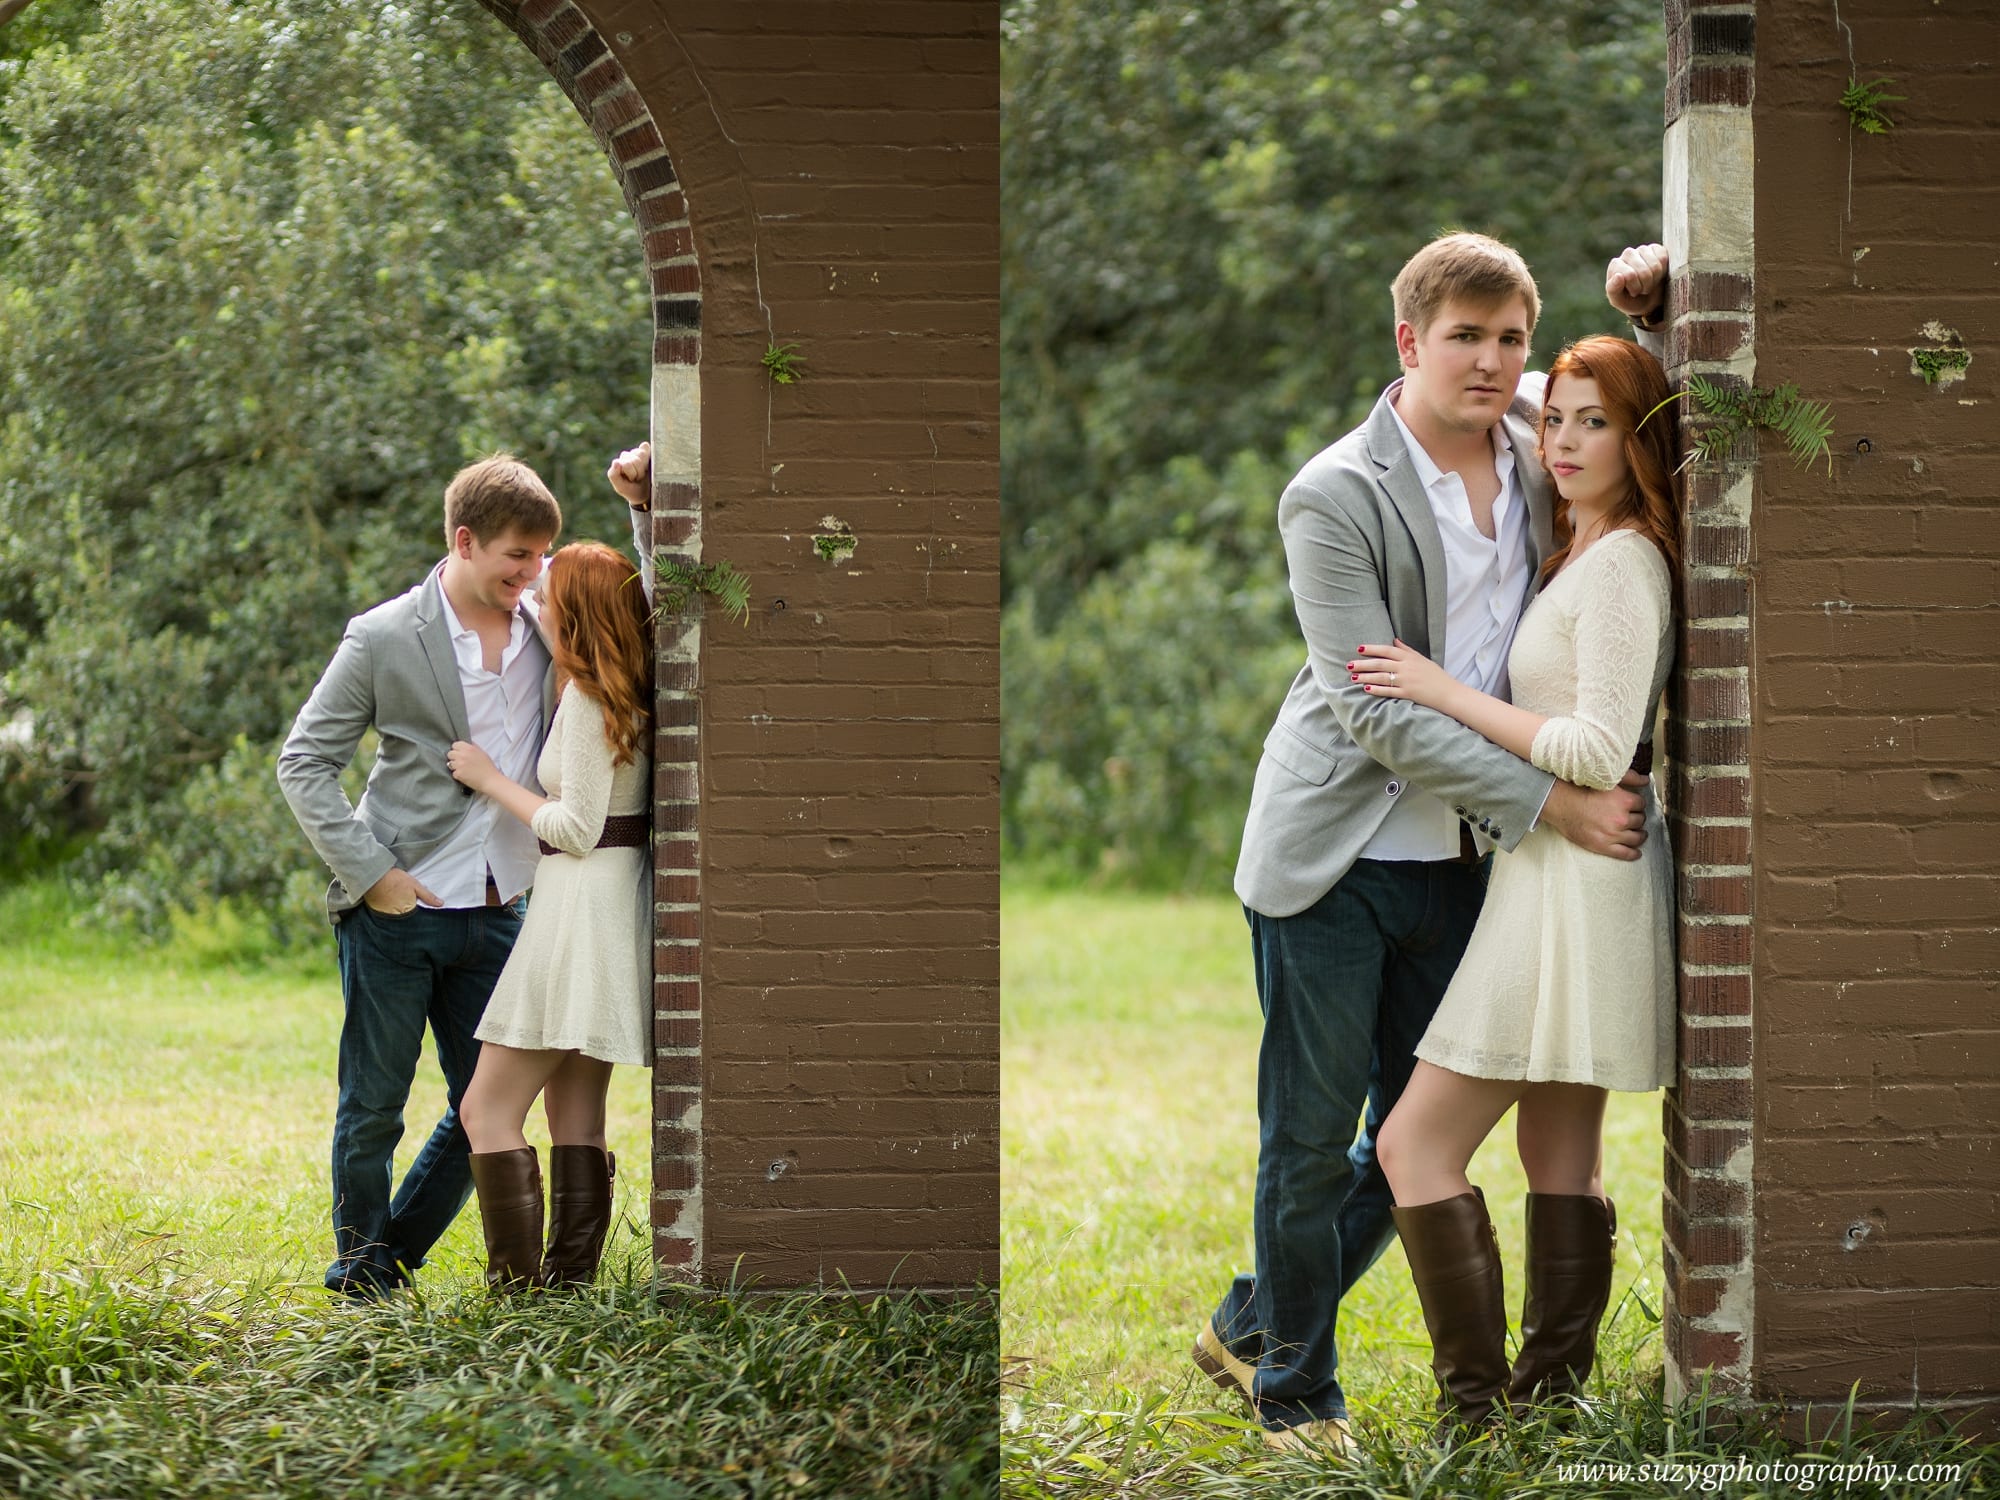 engagements-new orleans-texas-baton rouge-lake charles-suzy g-photography-suzygphotography_0126